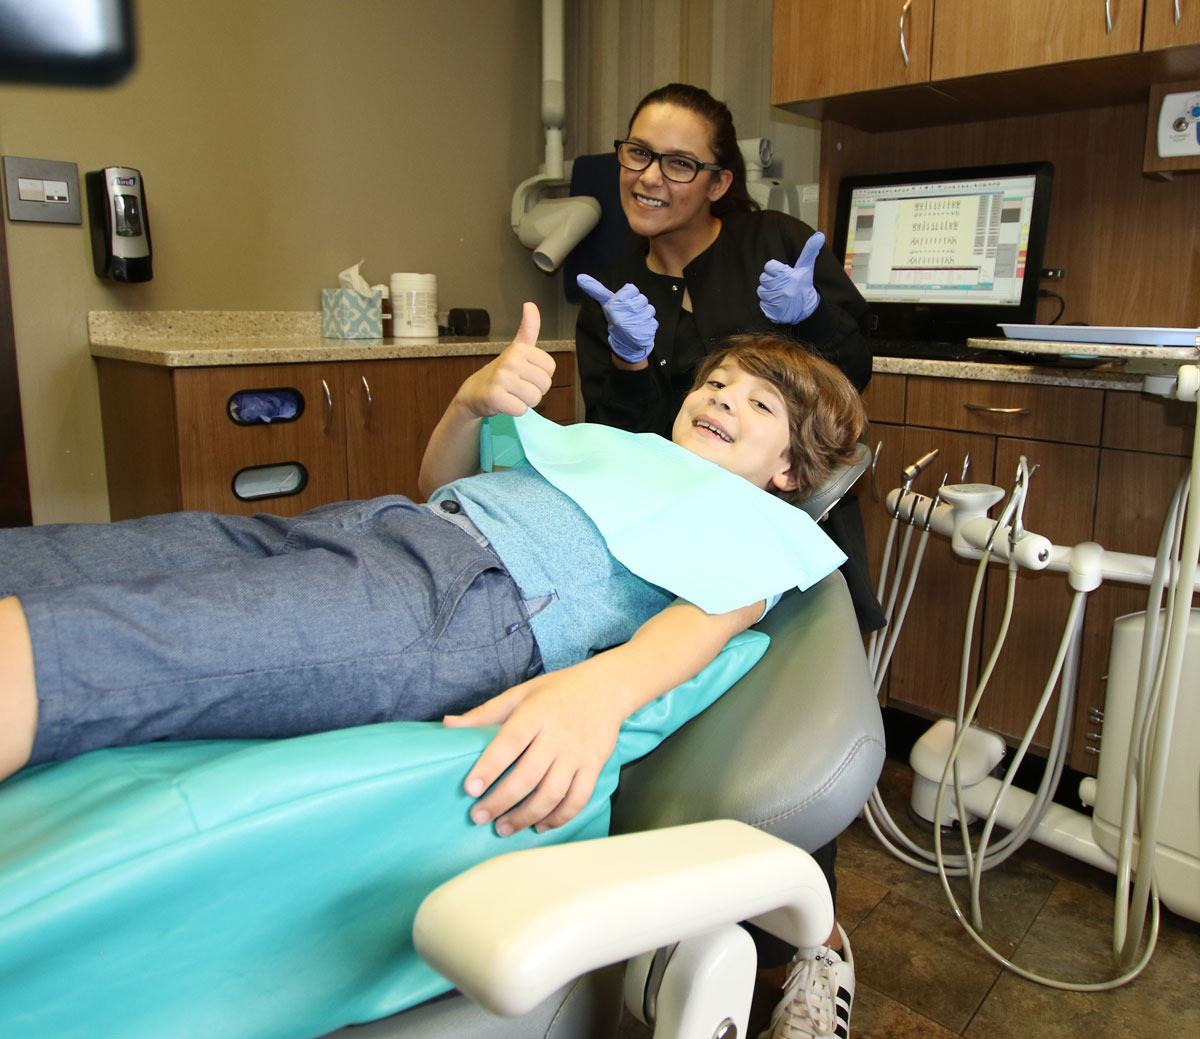 Kid giving thumbs up after a dental exam at Grins & Giggles Family Dentistry in Spokane Valley, WA